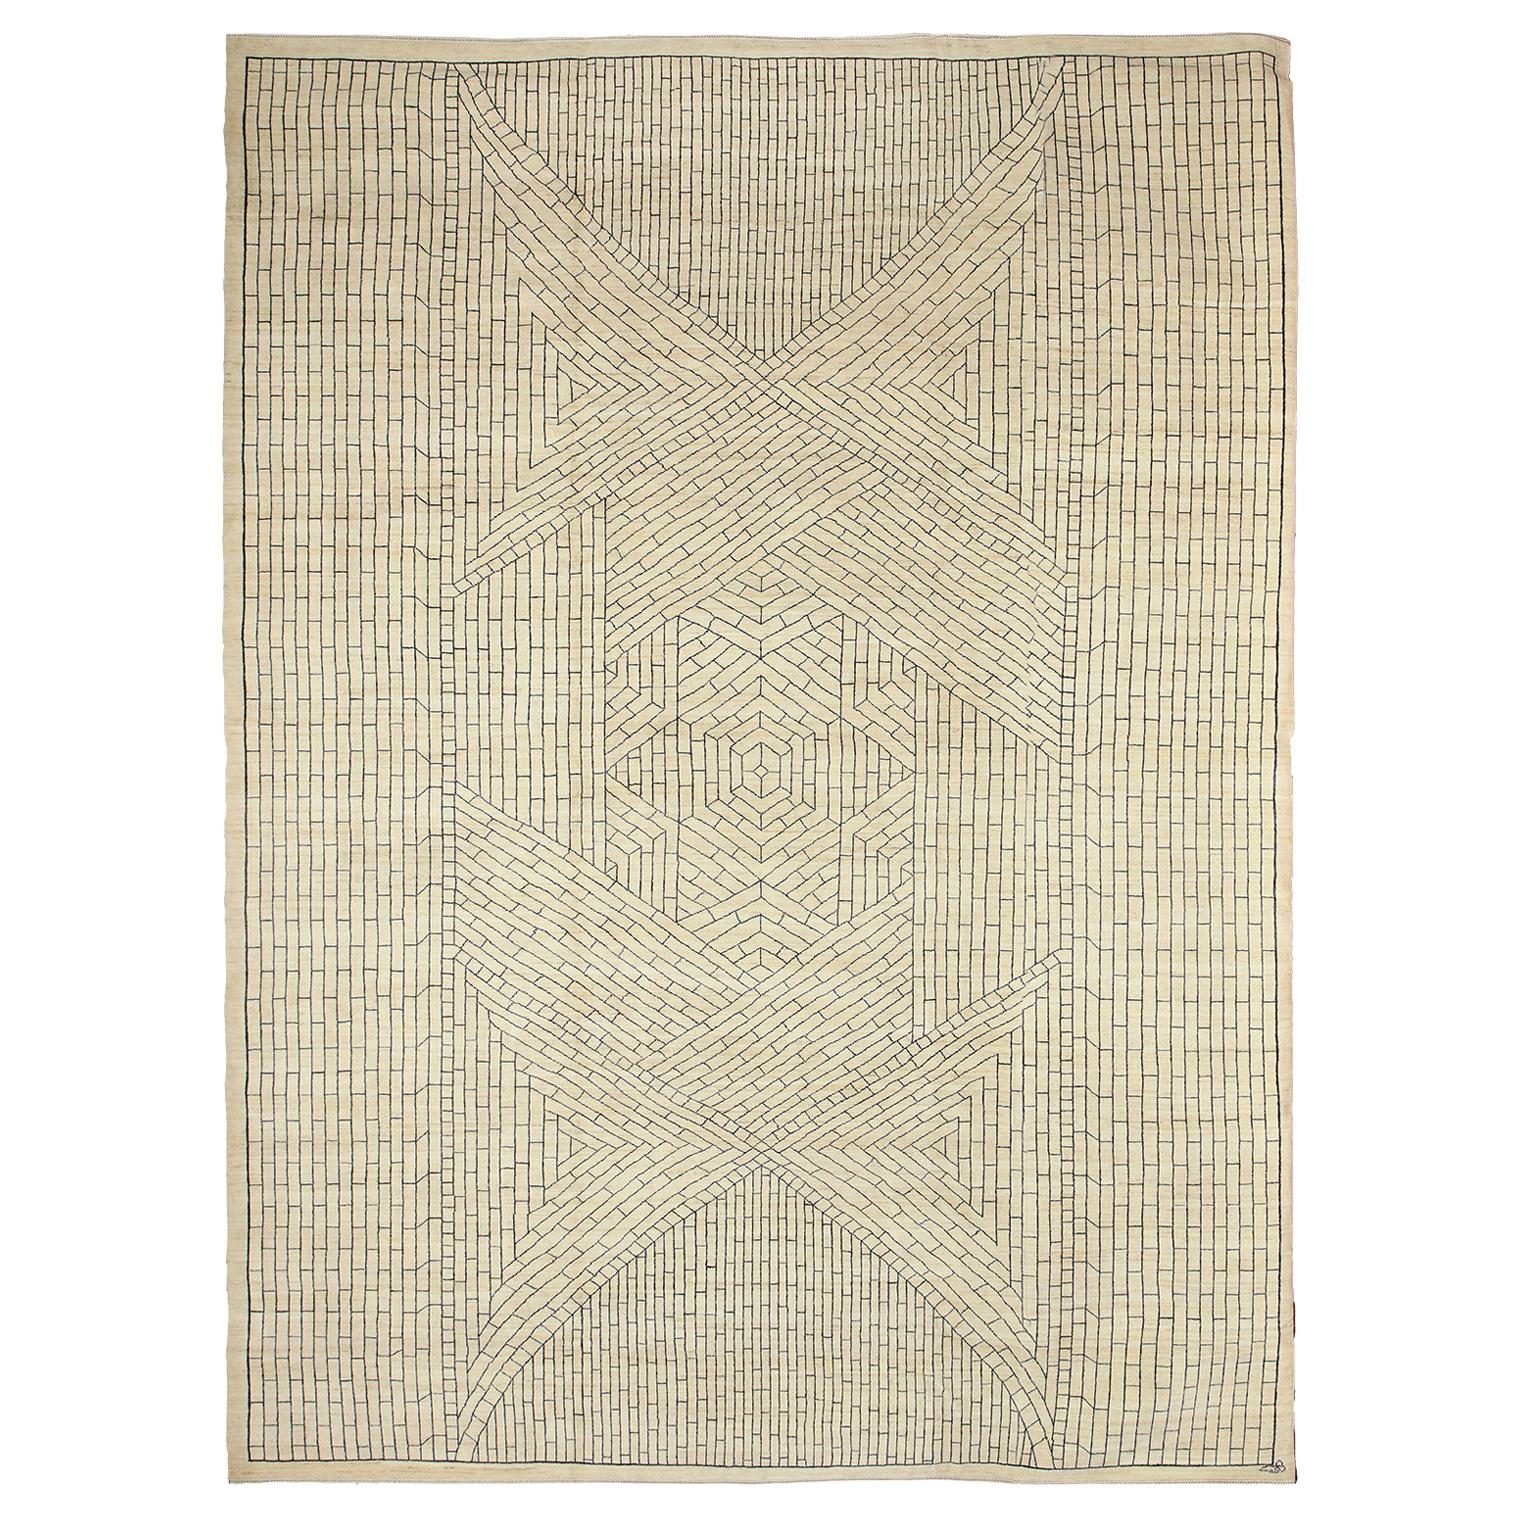 Cream and Gray Modern Wool Area Rug with Geometric Design by Orley Shabahang